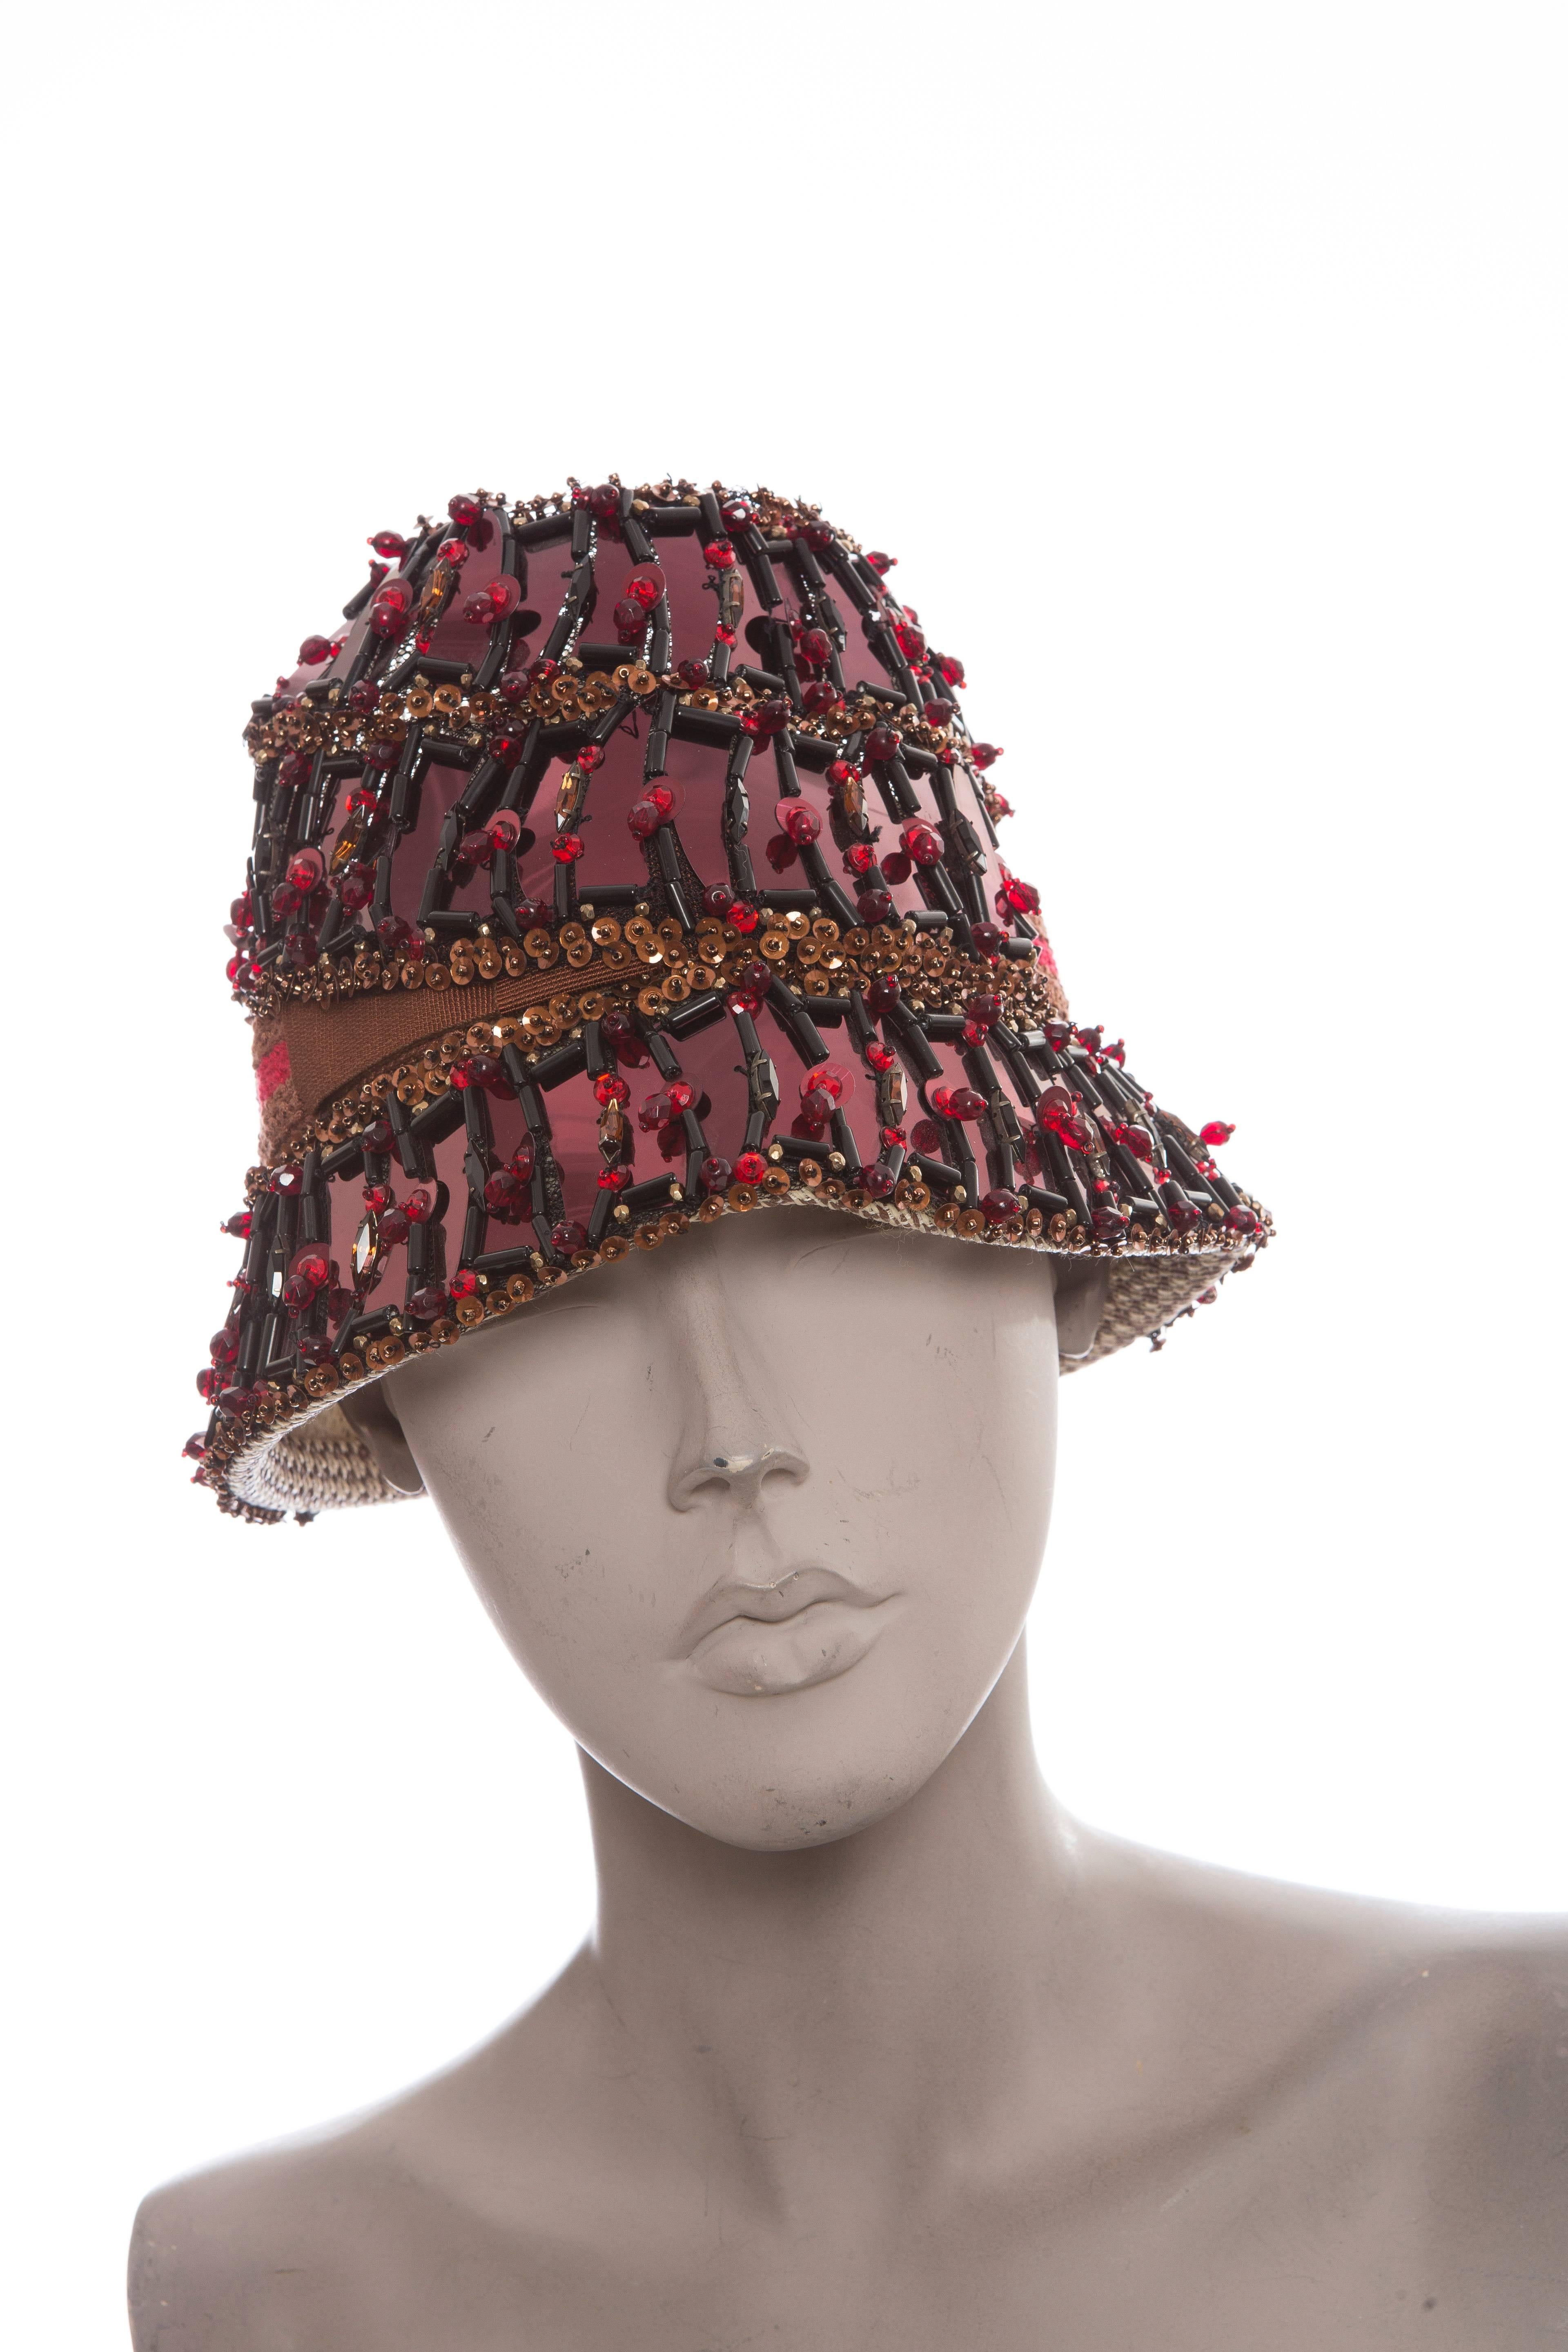 Prada, Spring/Summer 2005 cloche hat with sequin details, bead embellishments, crocheted trim, woven top and brim.

Circumference 22”, Brim 2.25”